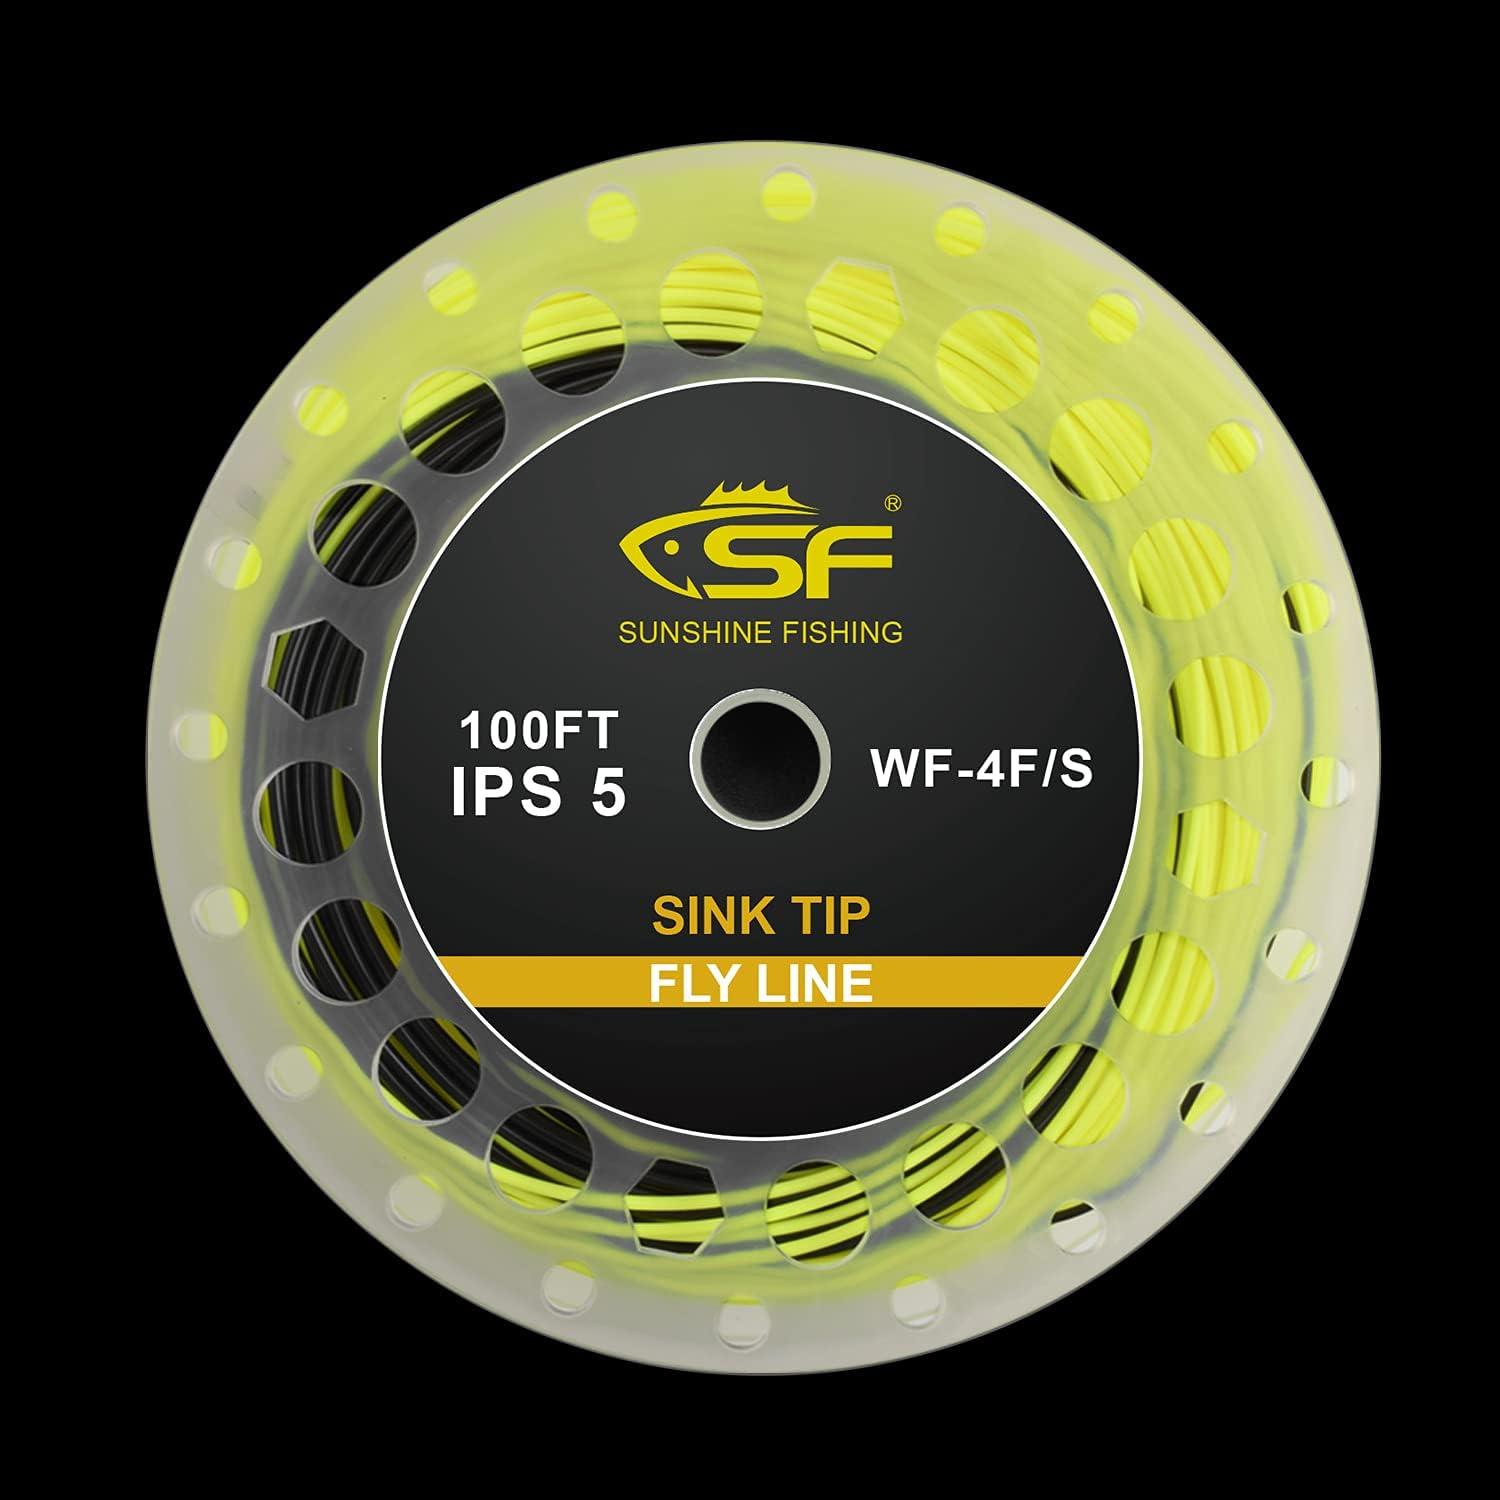 SF Sinking Tip Line Weight Forward Taper Fly Line Fly Fishing Line